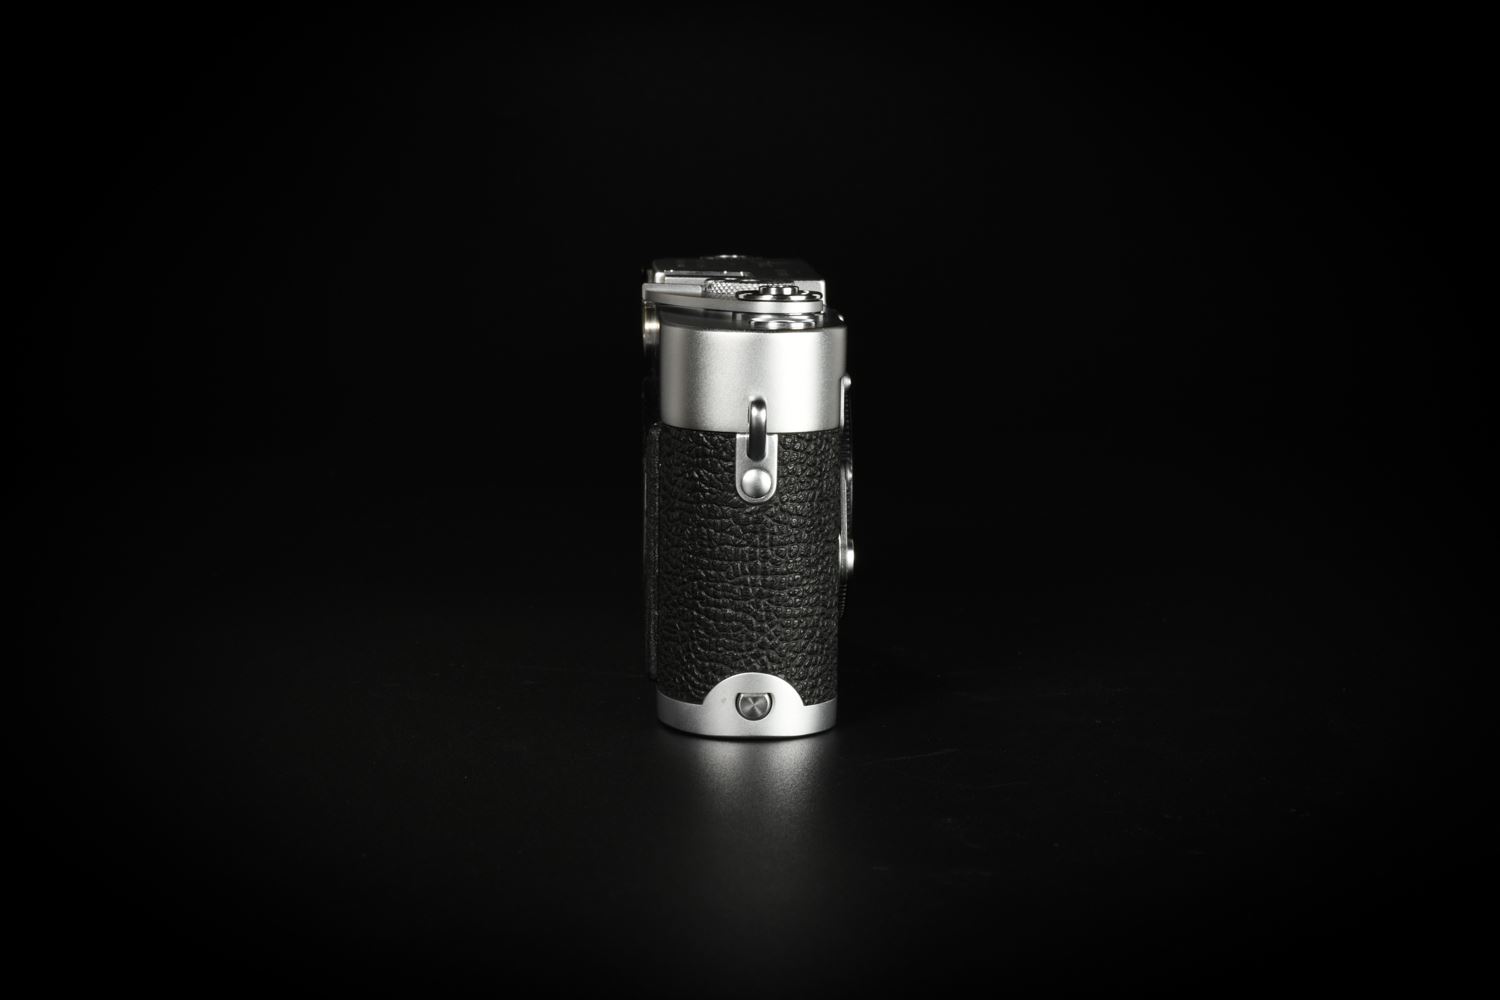 Picture of Leica M3 Silver Double Stroke